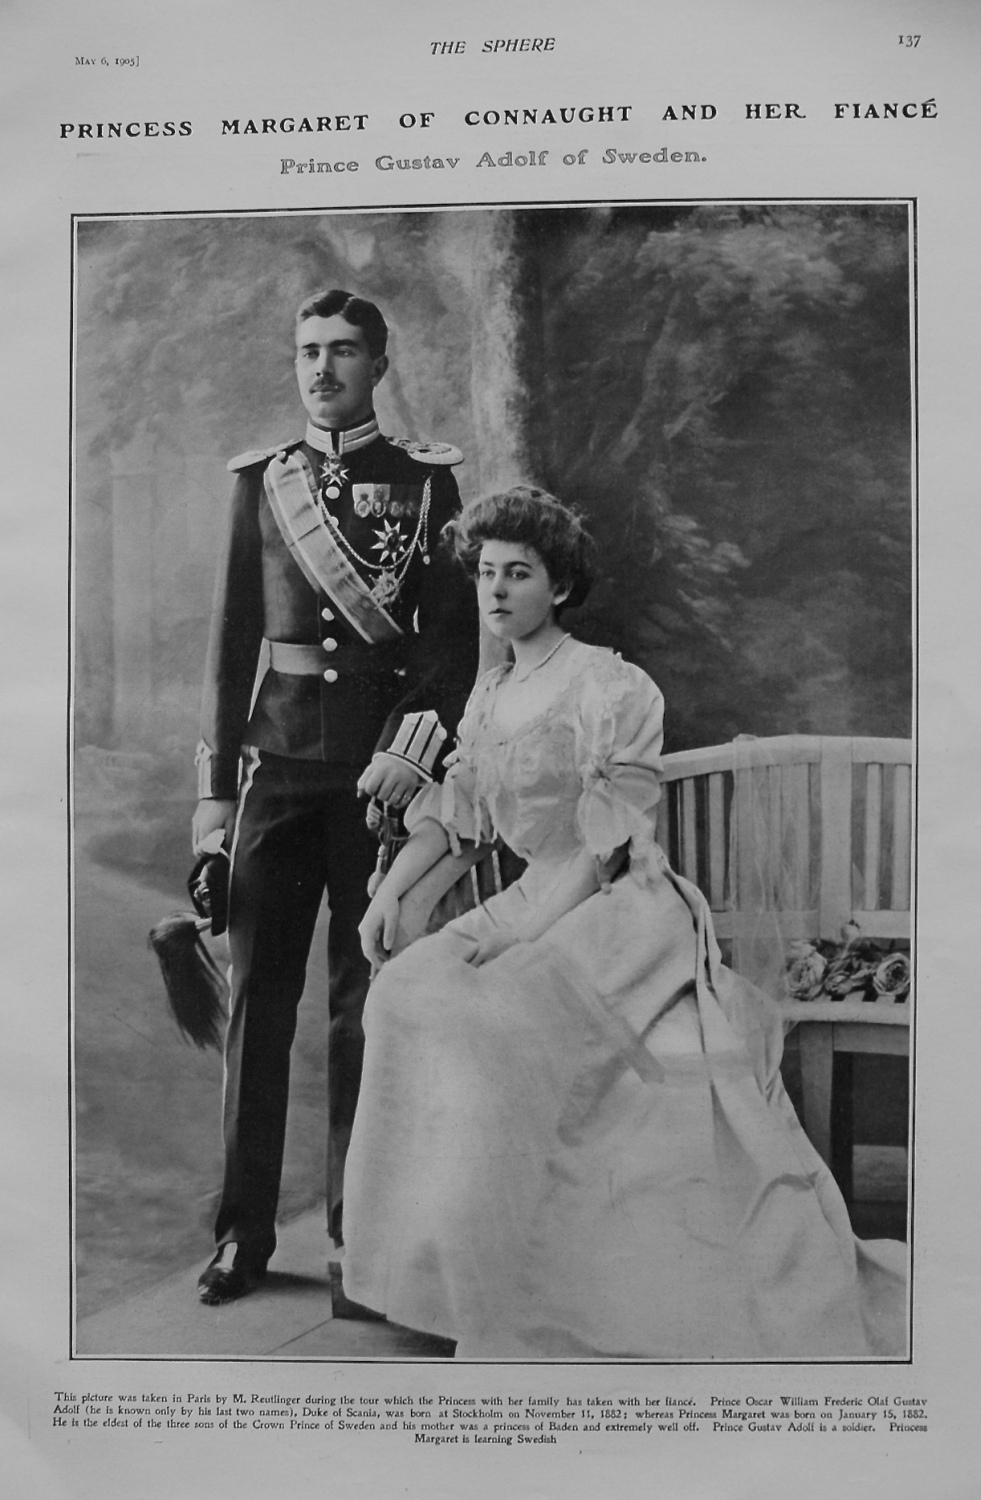 Princess Margaret of Connaught and Have Fiance Prince Gustav Adolf of Swede